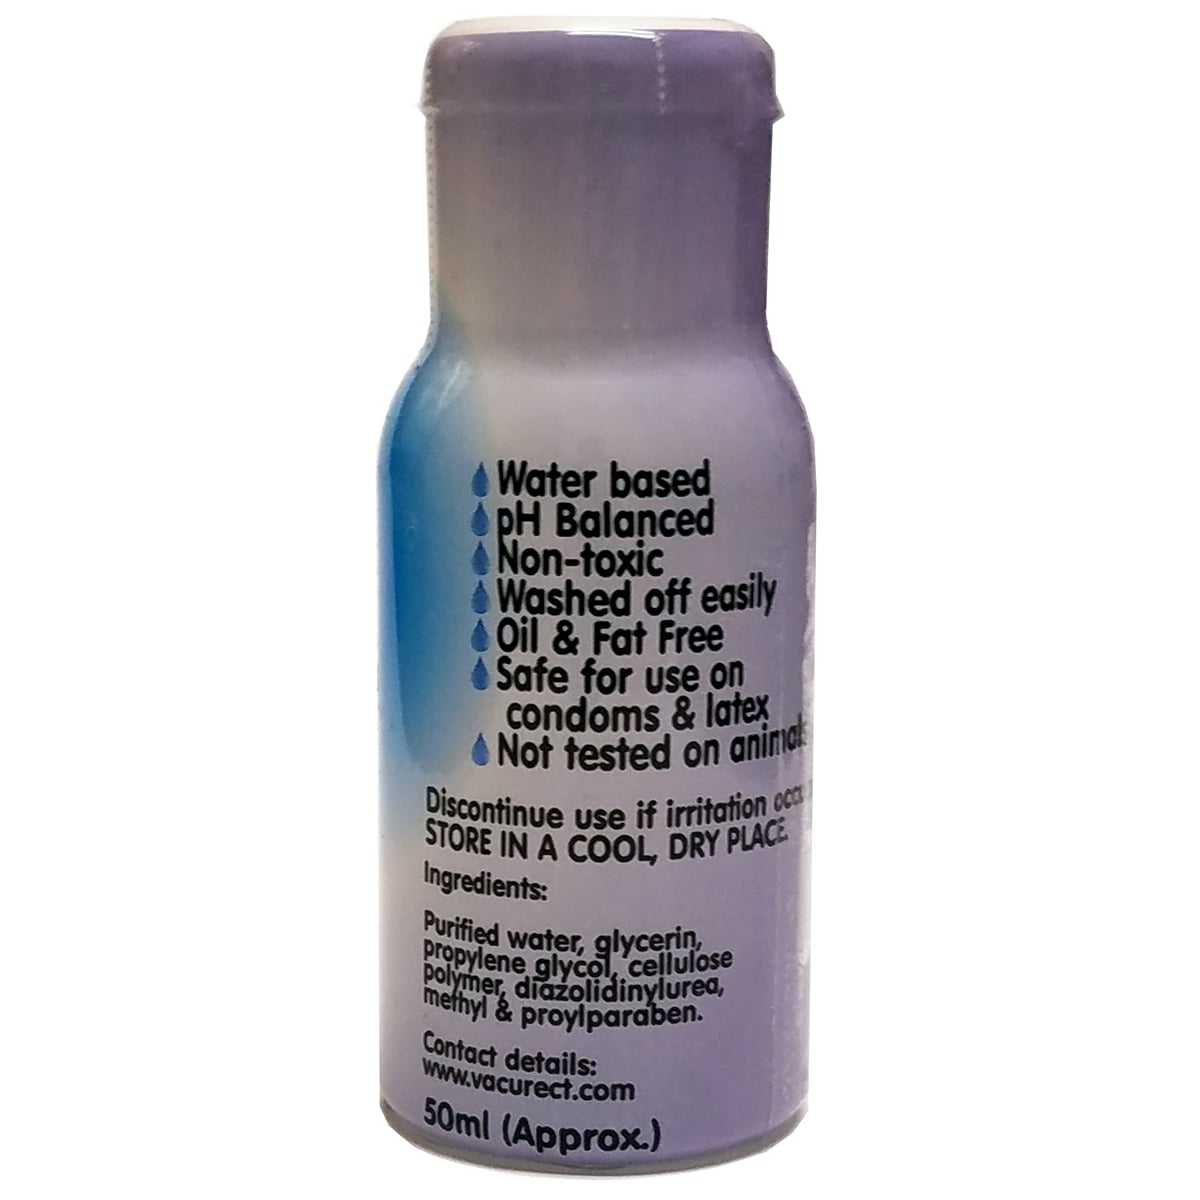 Vacurect Water Soluble Personal Lubricant - 50ml / 2 oz.